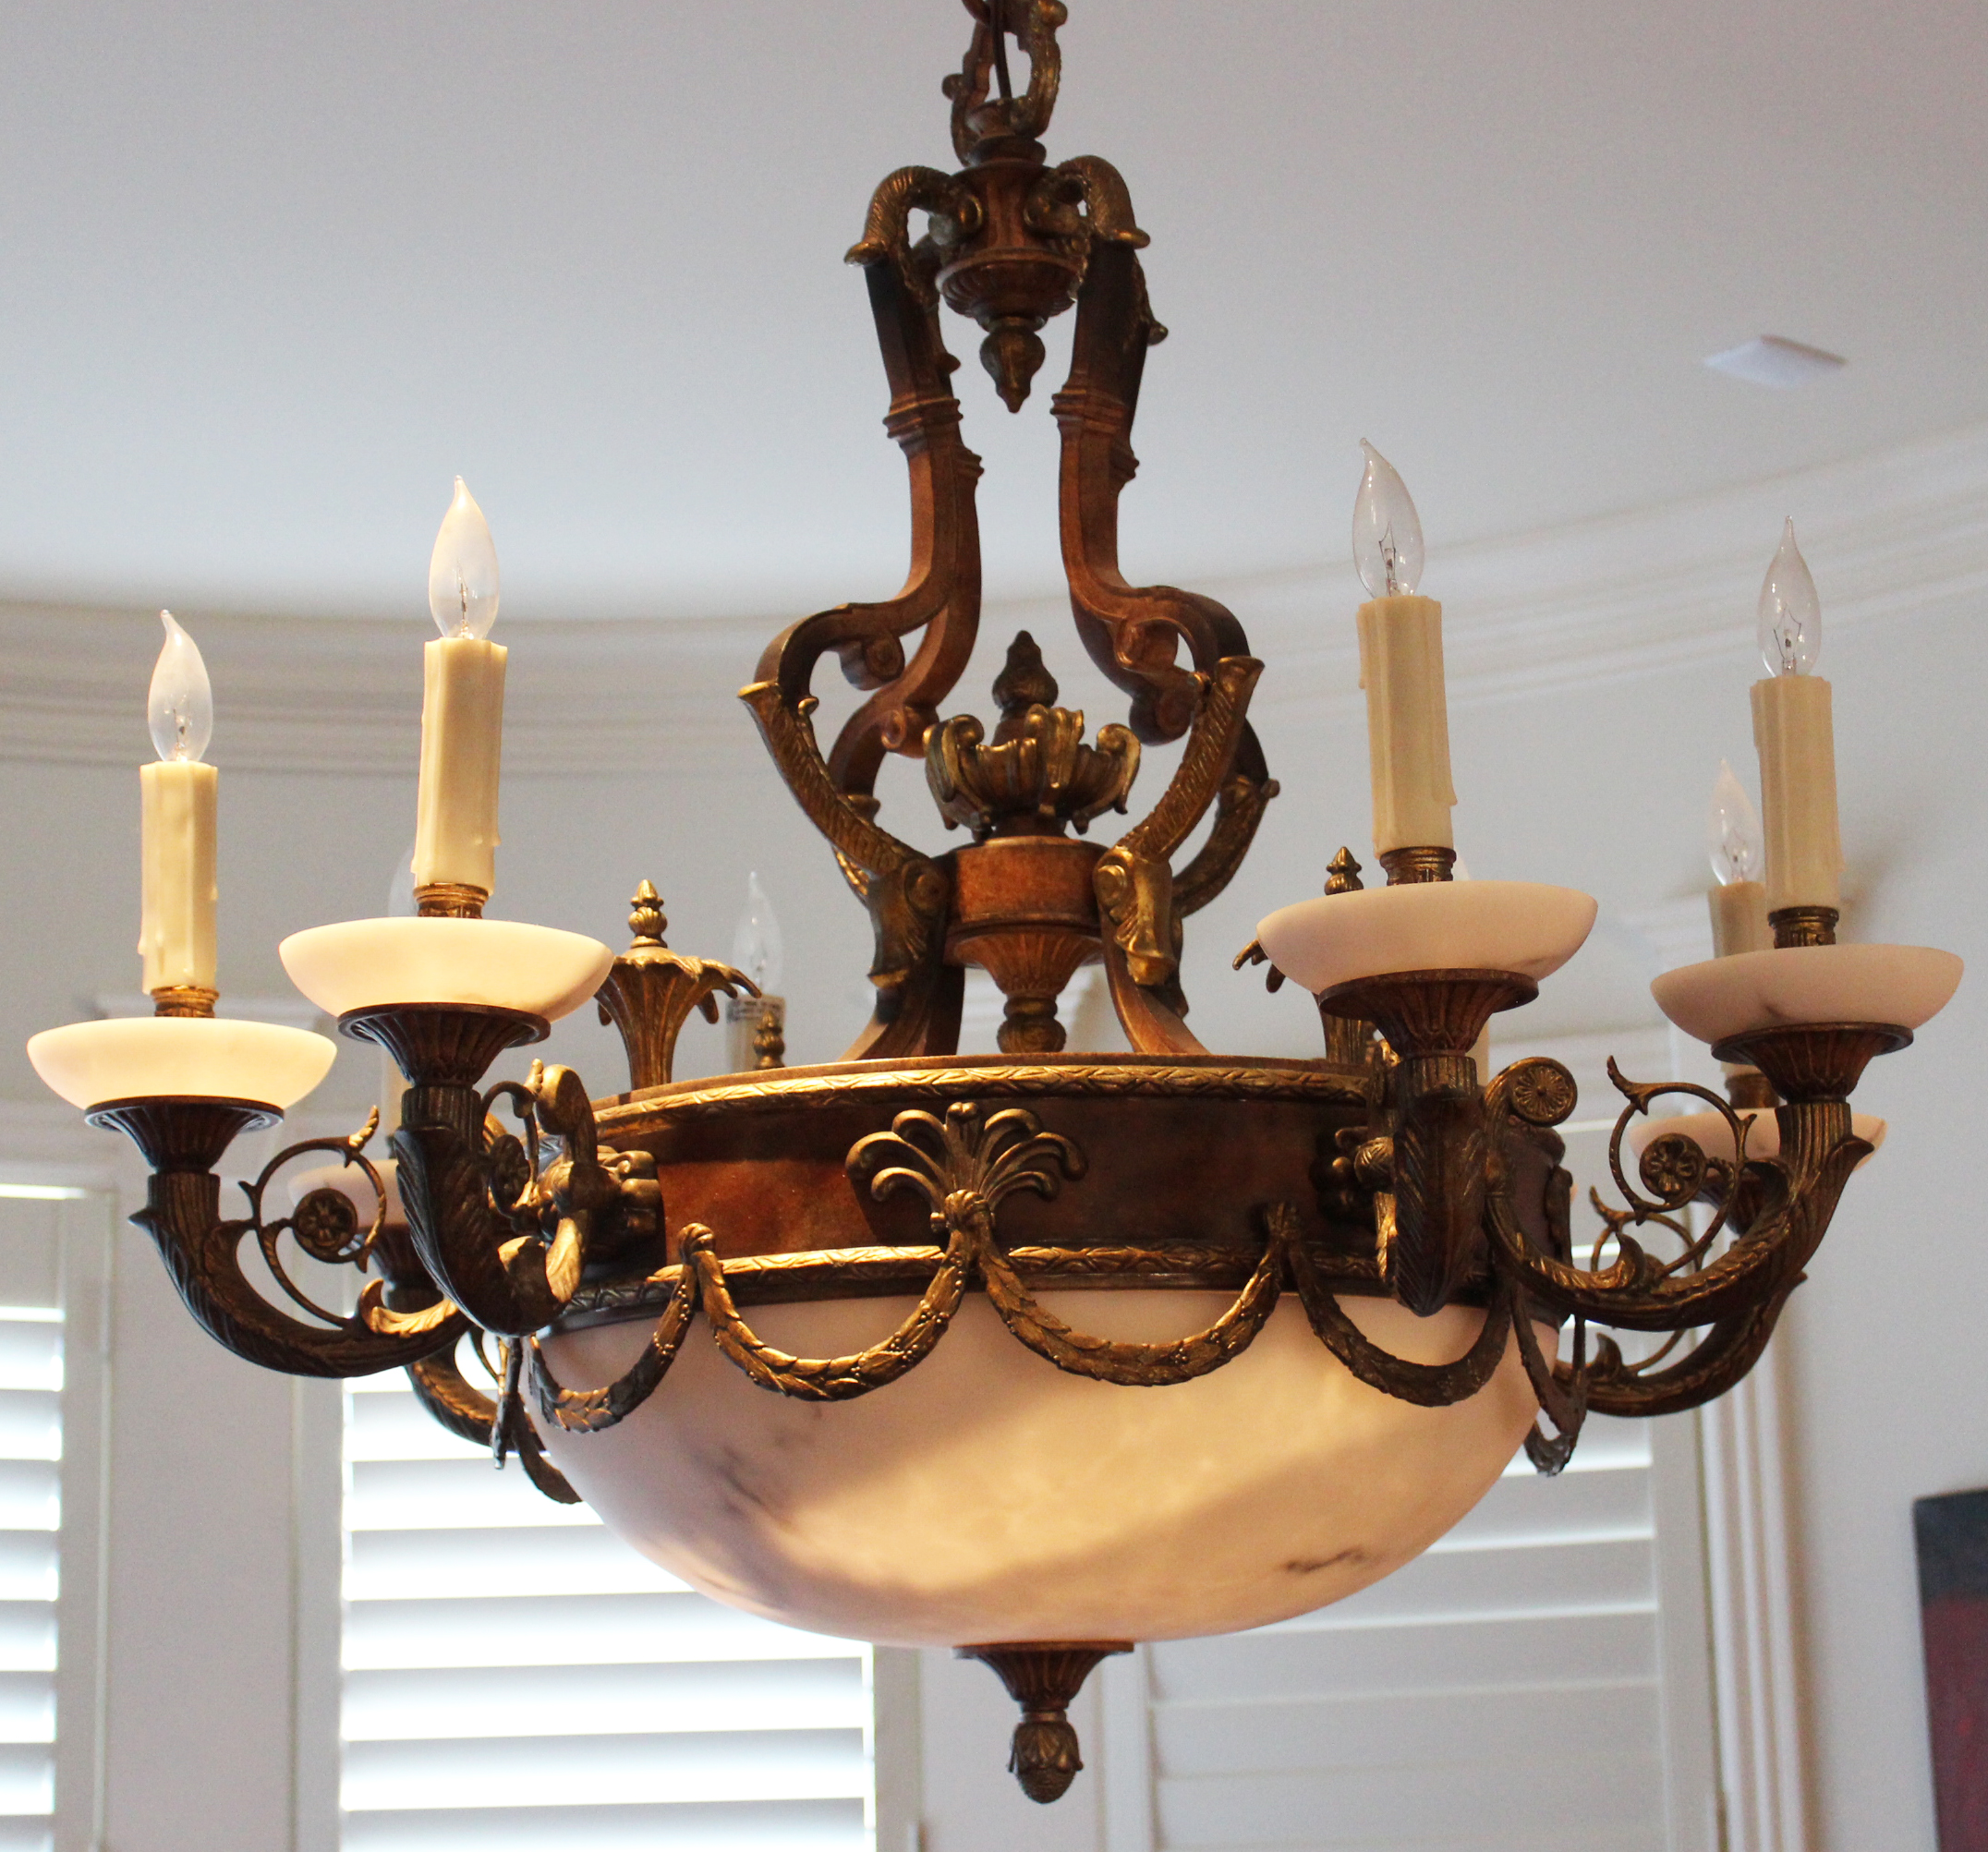 LARGE EMPIRE STYLE CHANDELIER LARGE